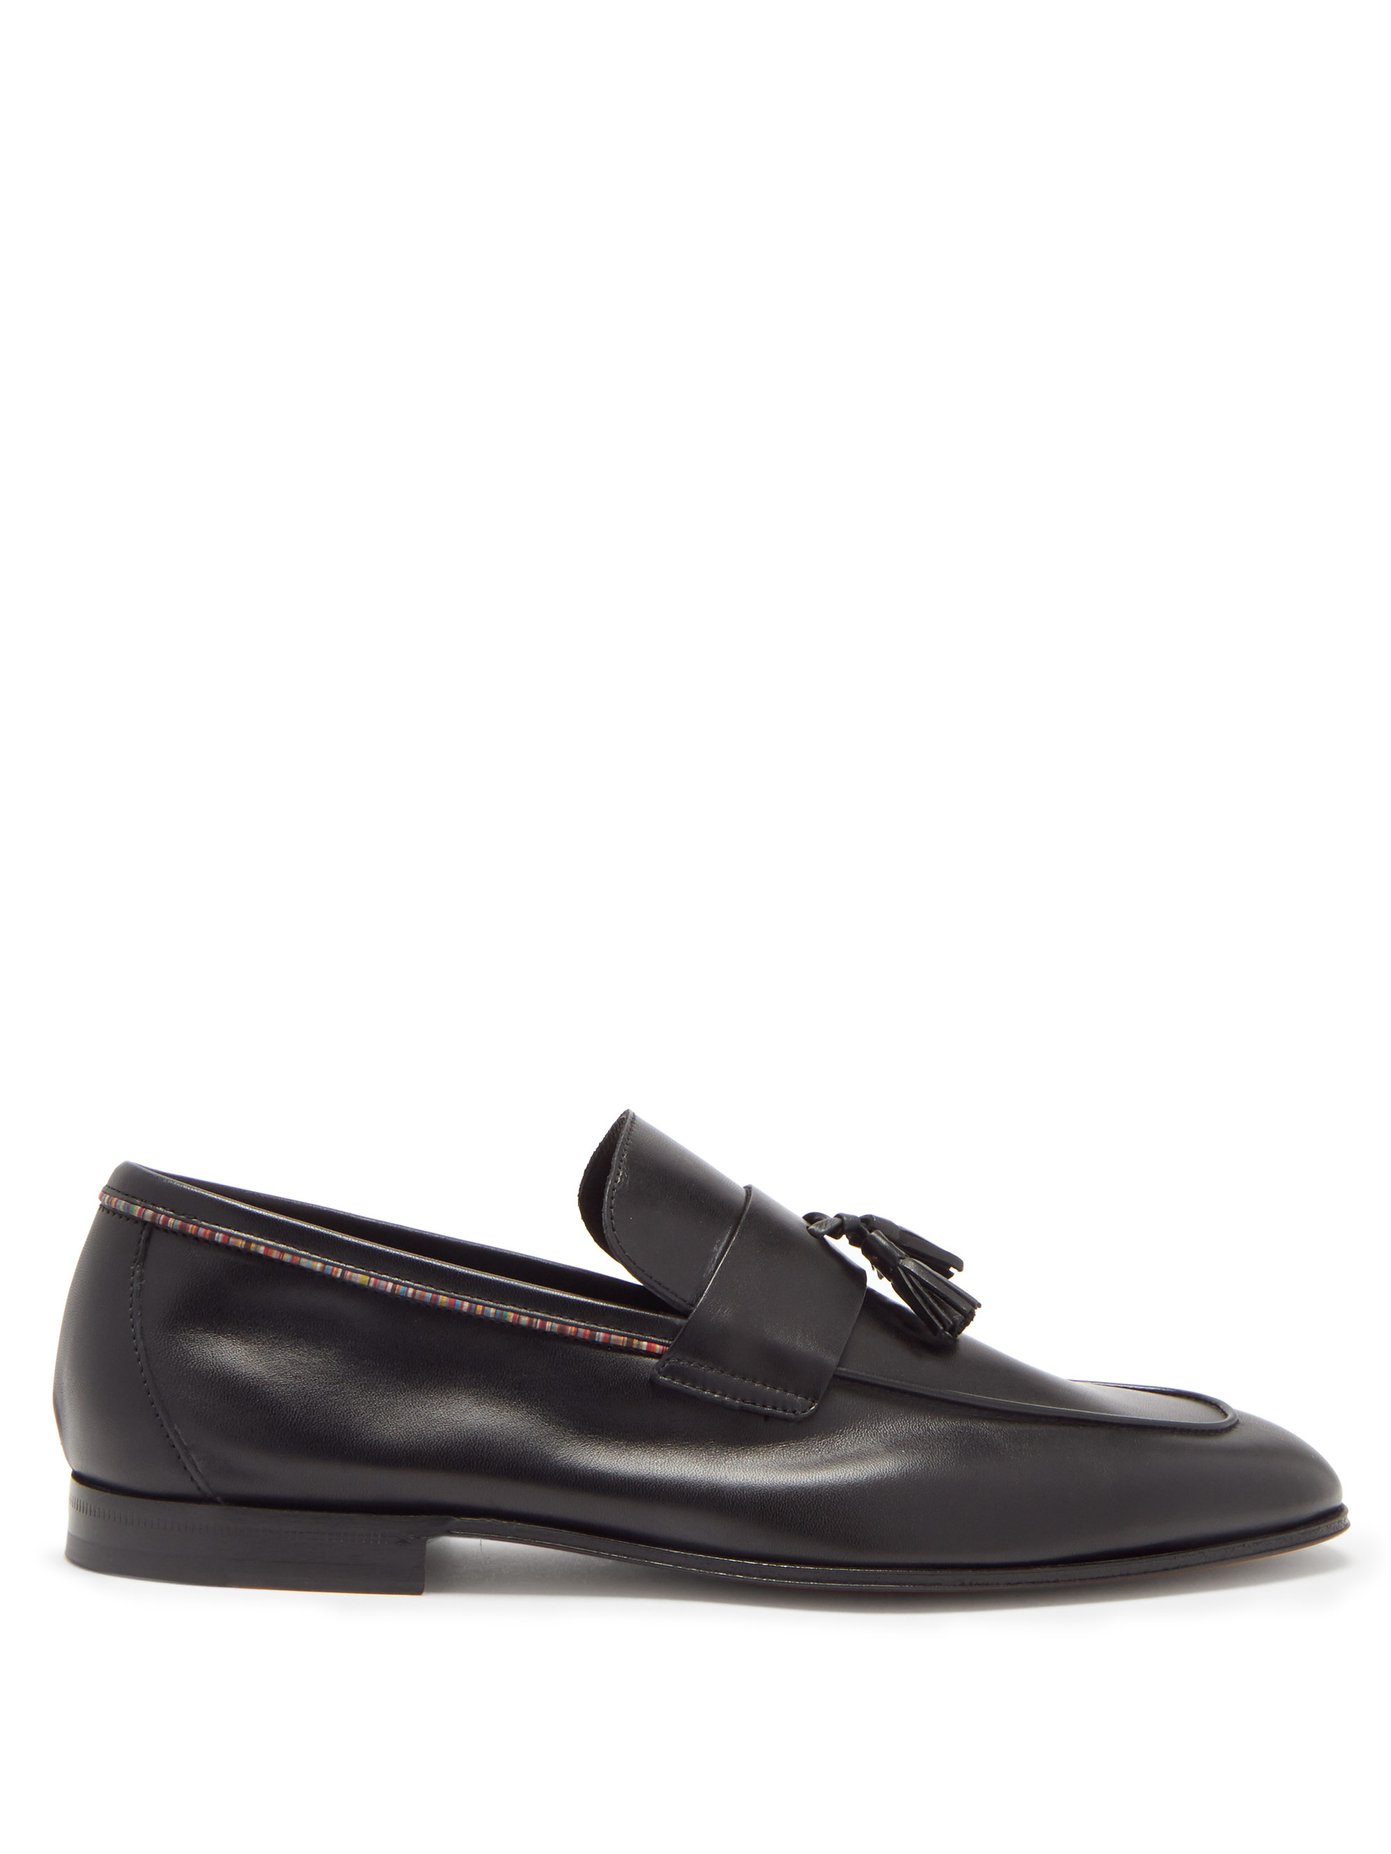 paul smith loafers